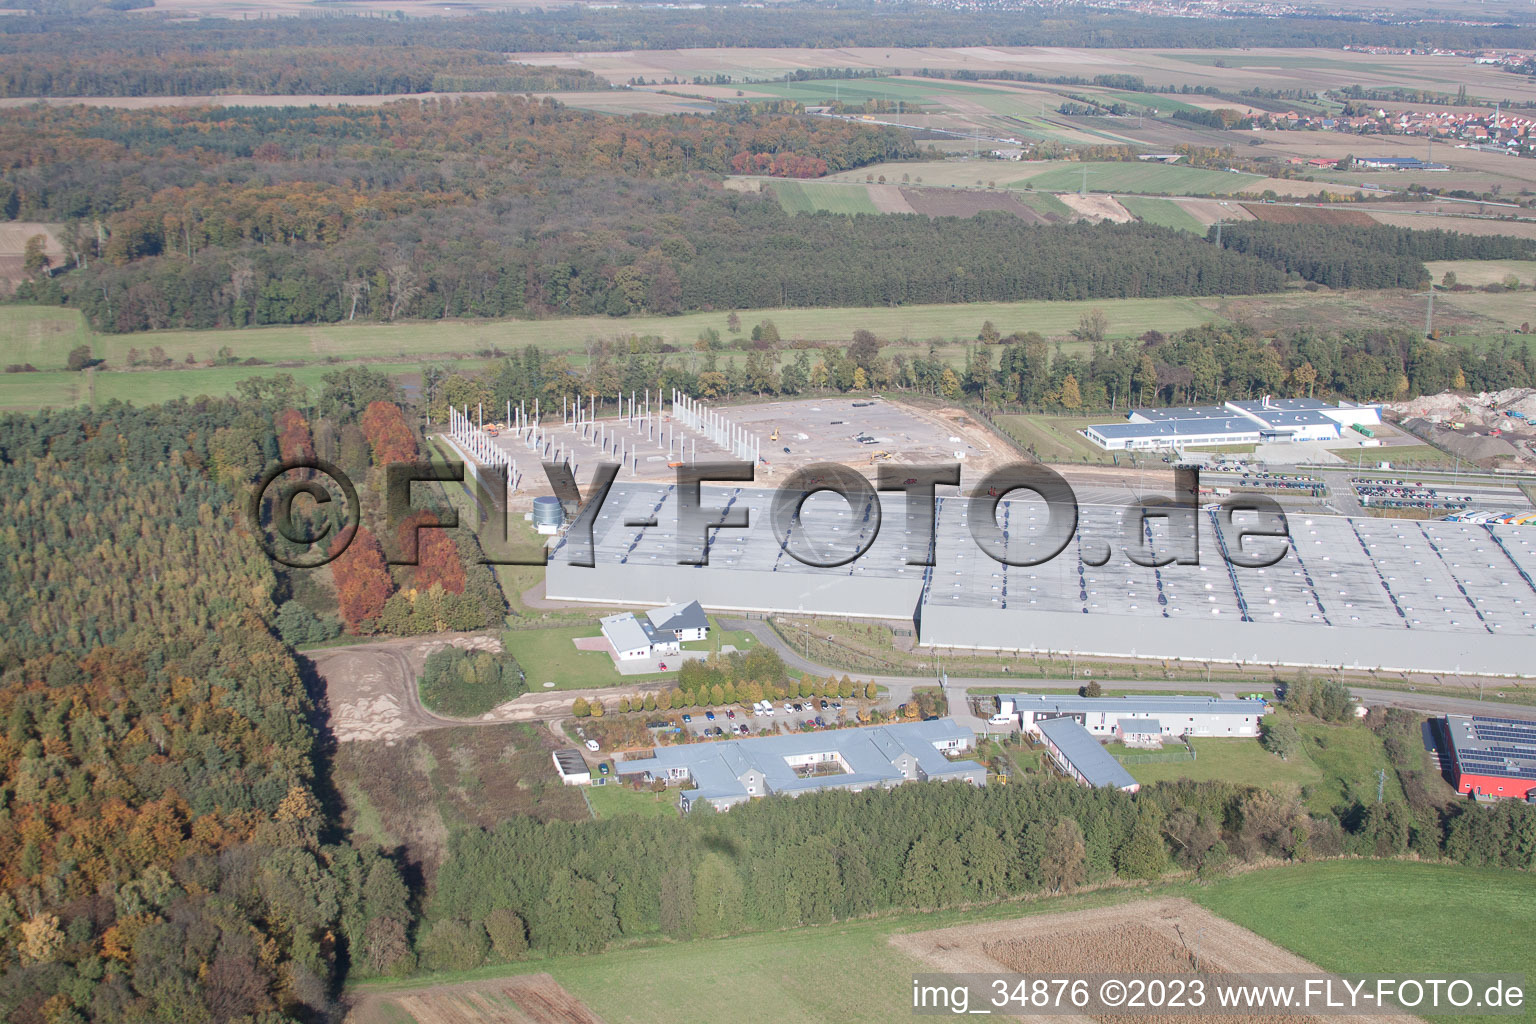 Horst industrial area in the district Minderslachen in Kandel in the state Rhineland-Palatinate, Germany viewn from the air